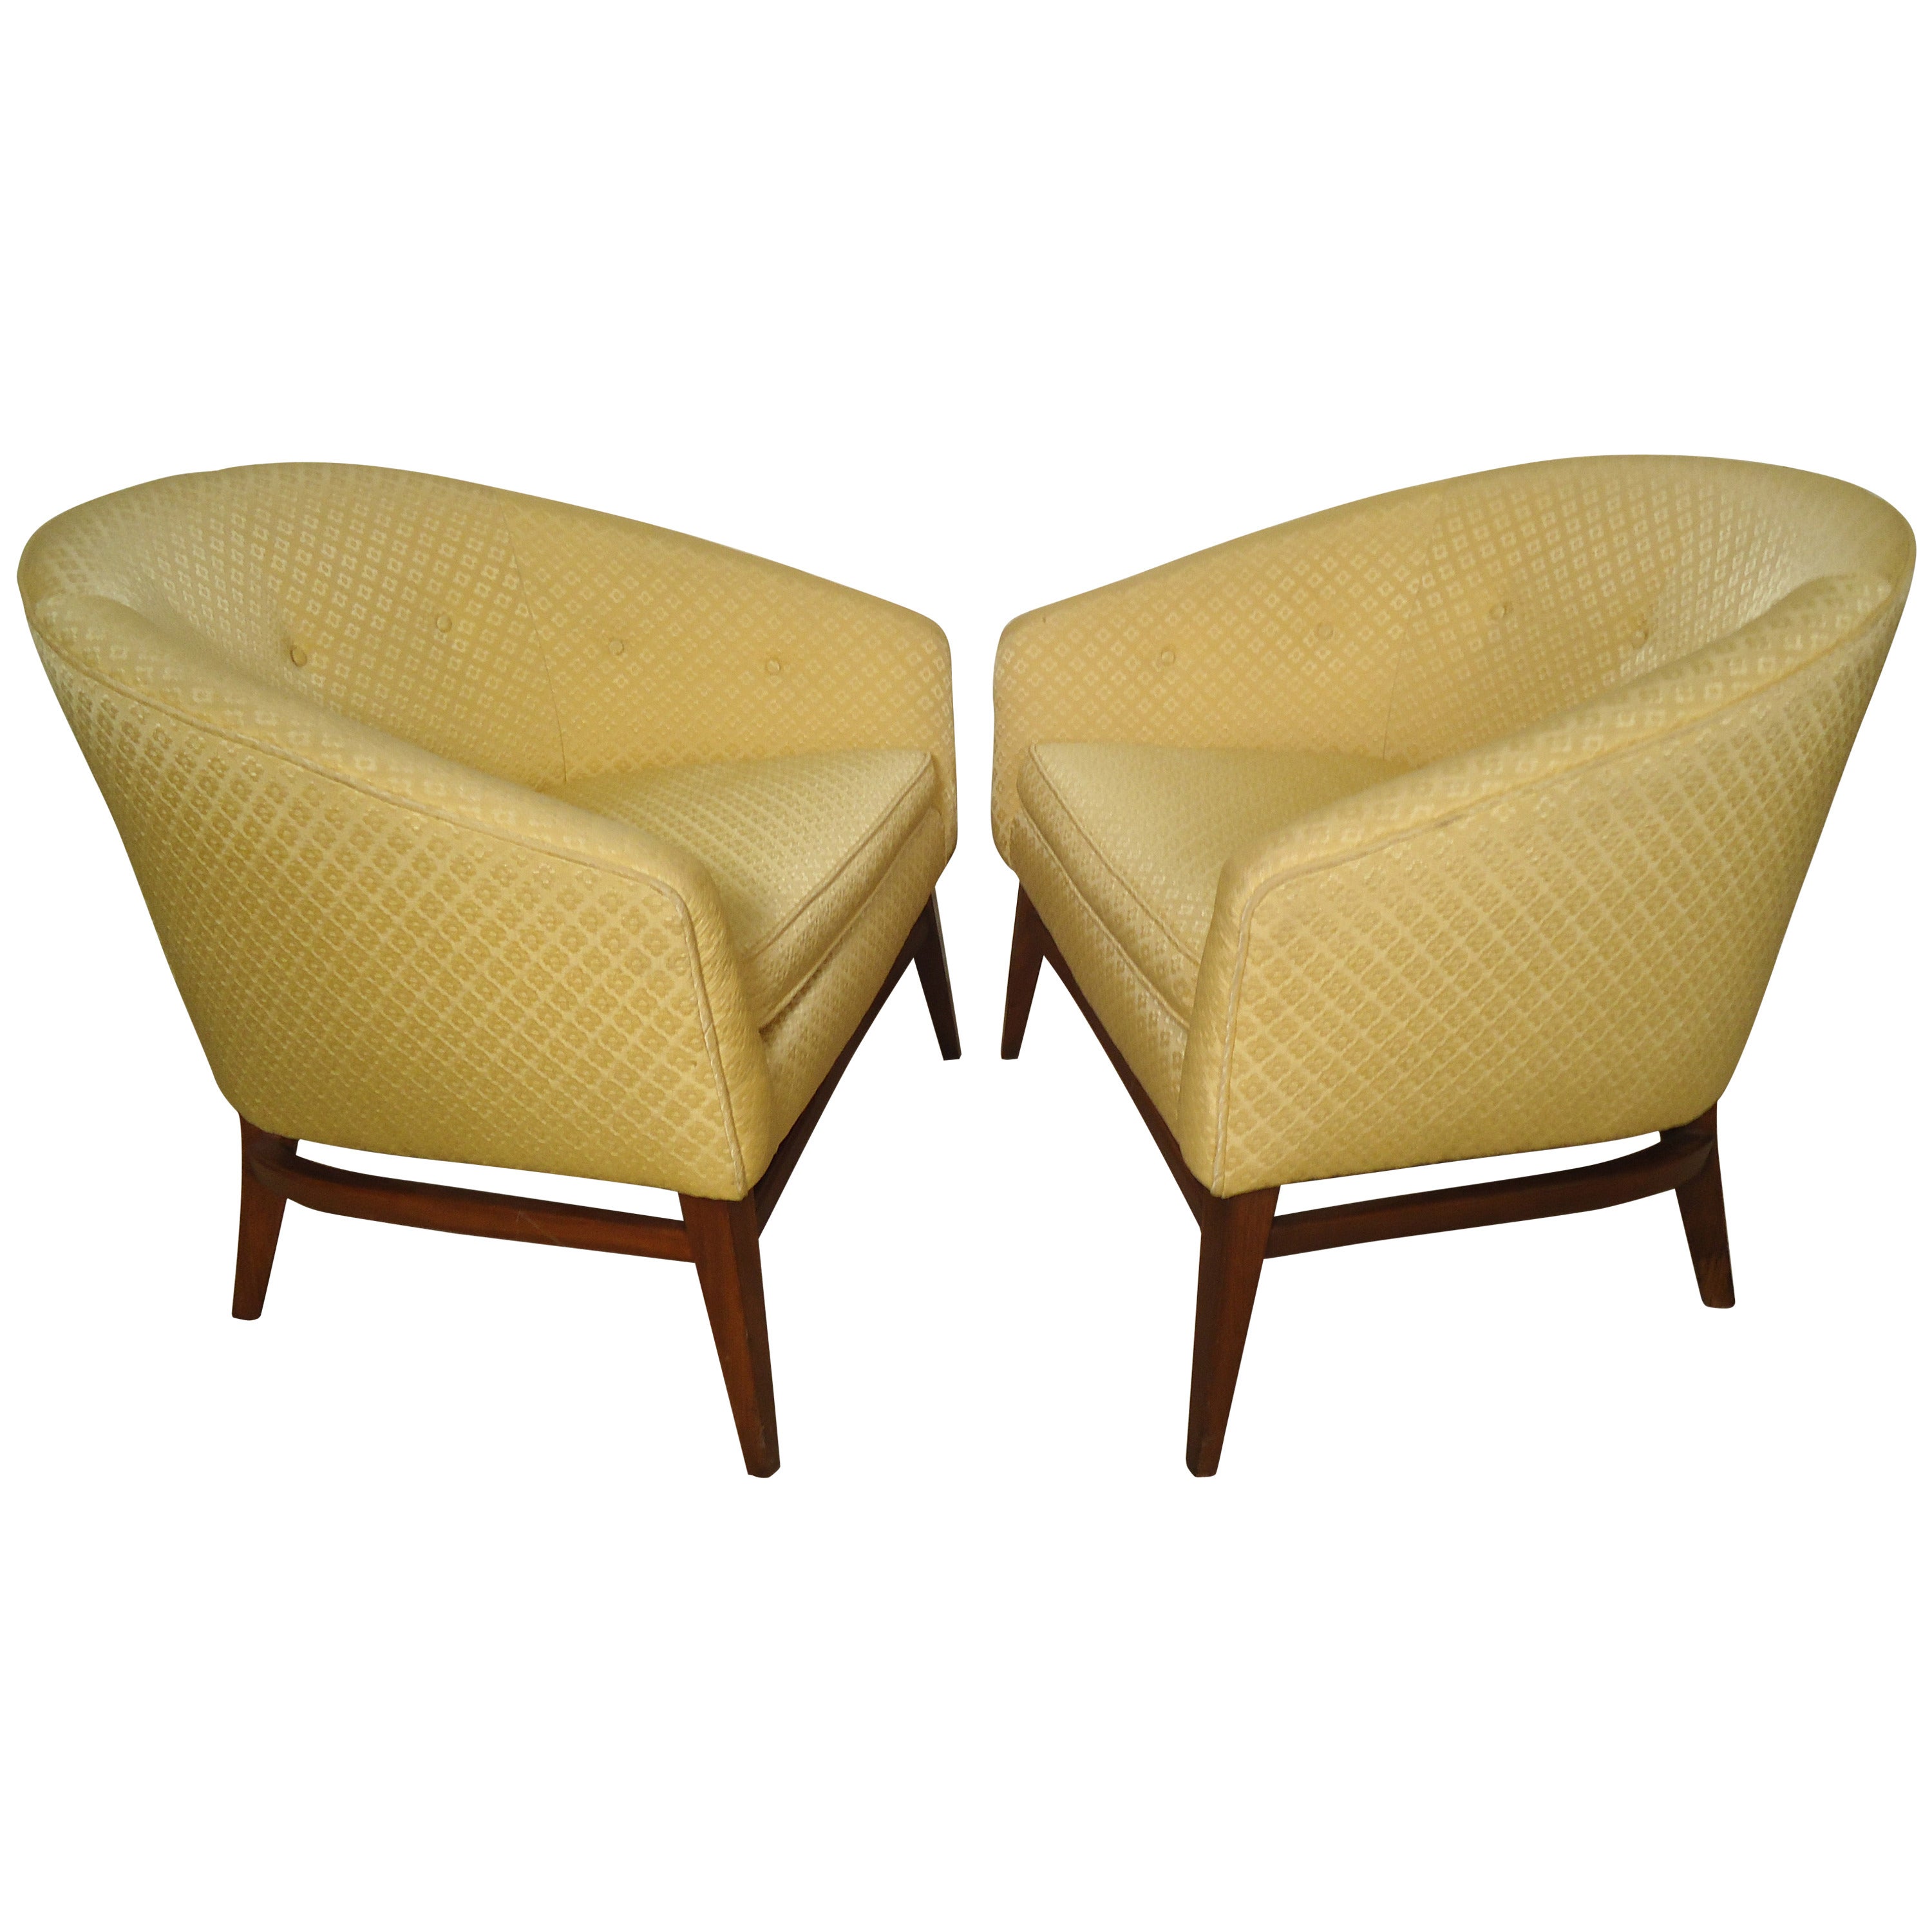 Pair of Mid-century Barrel Chairs by Lawrence Peabody for Craft Associates